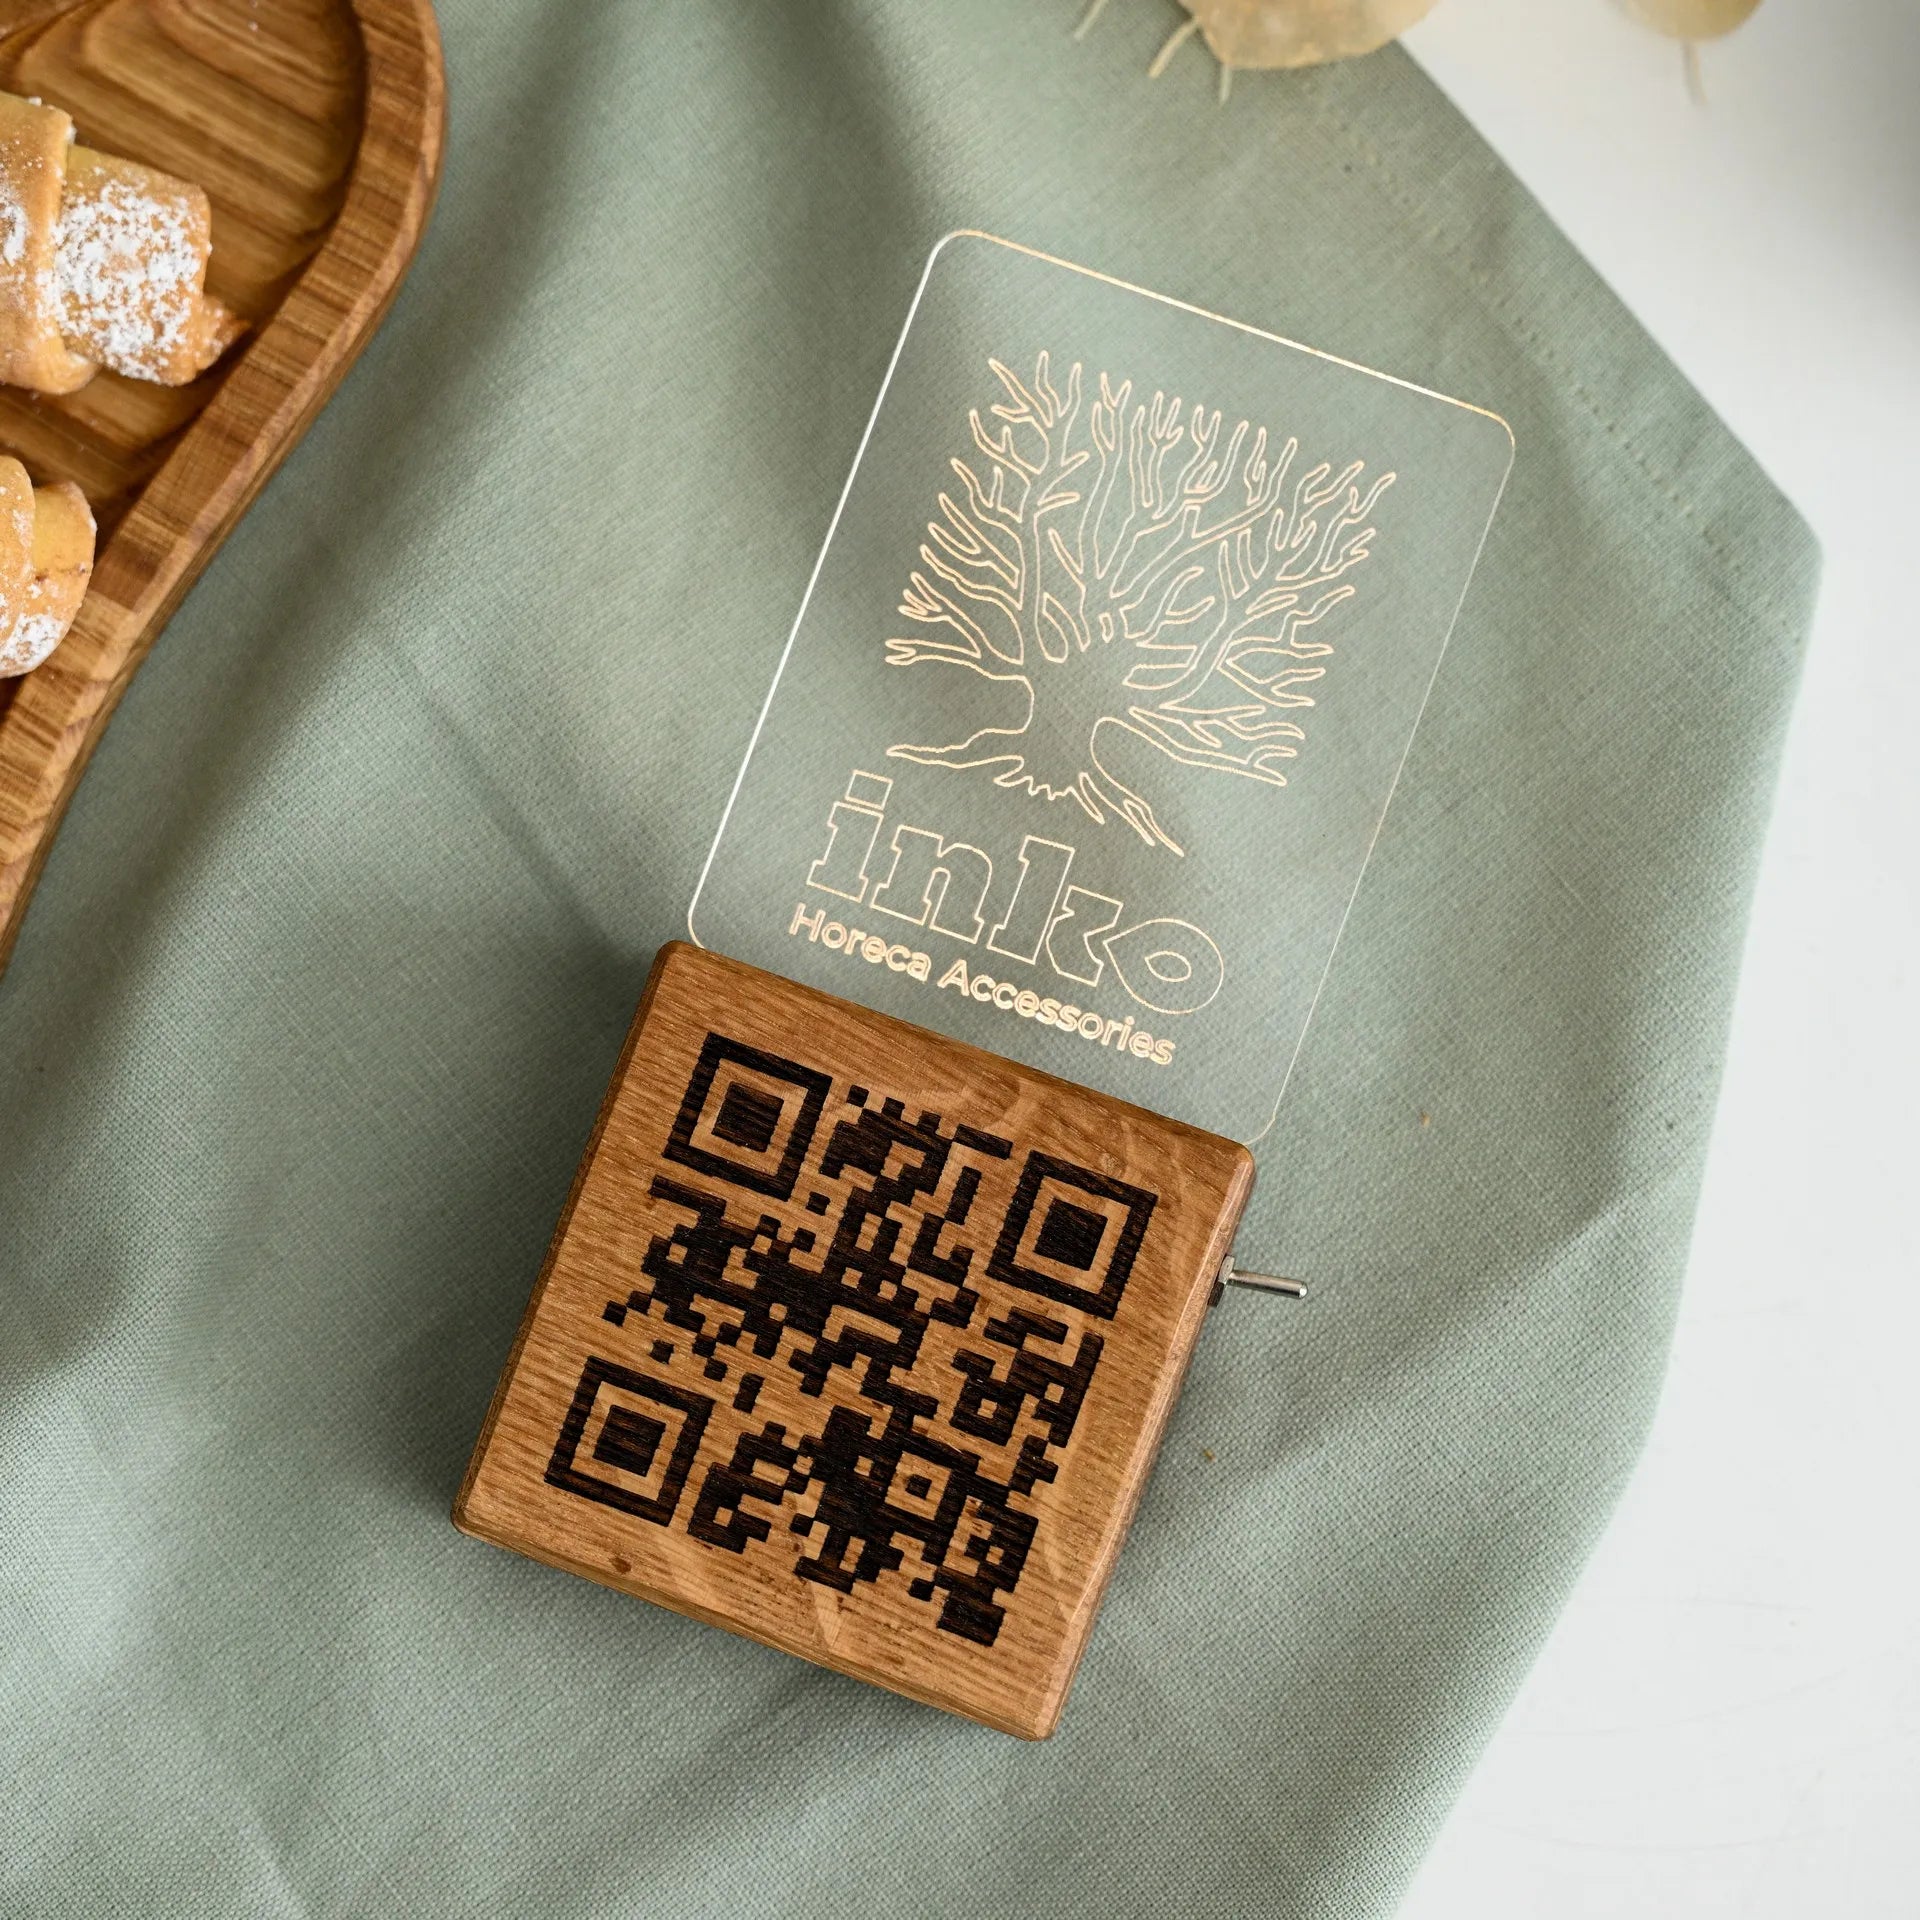 Illuminate your brand with our QR code display solutions.